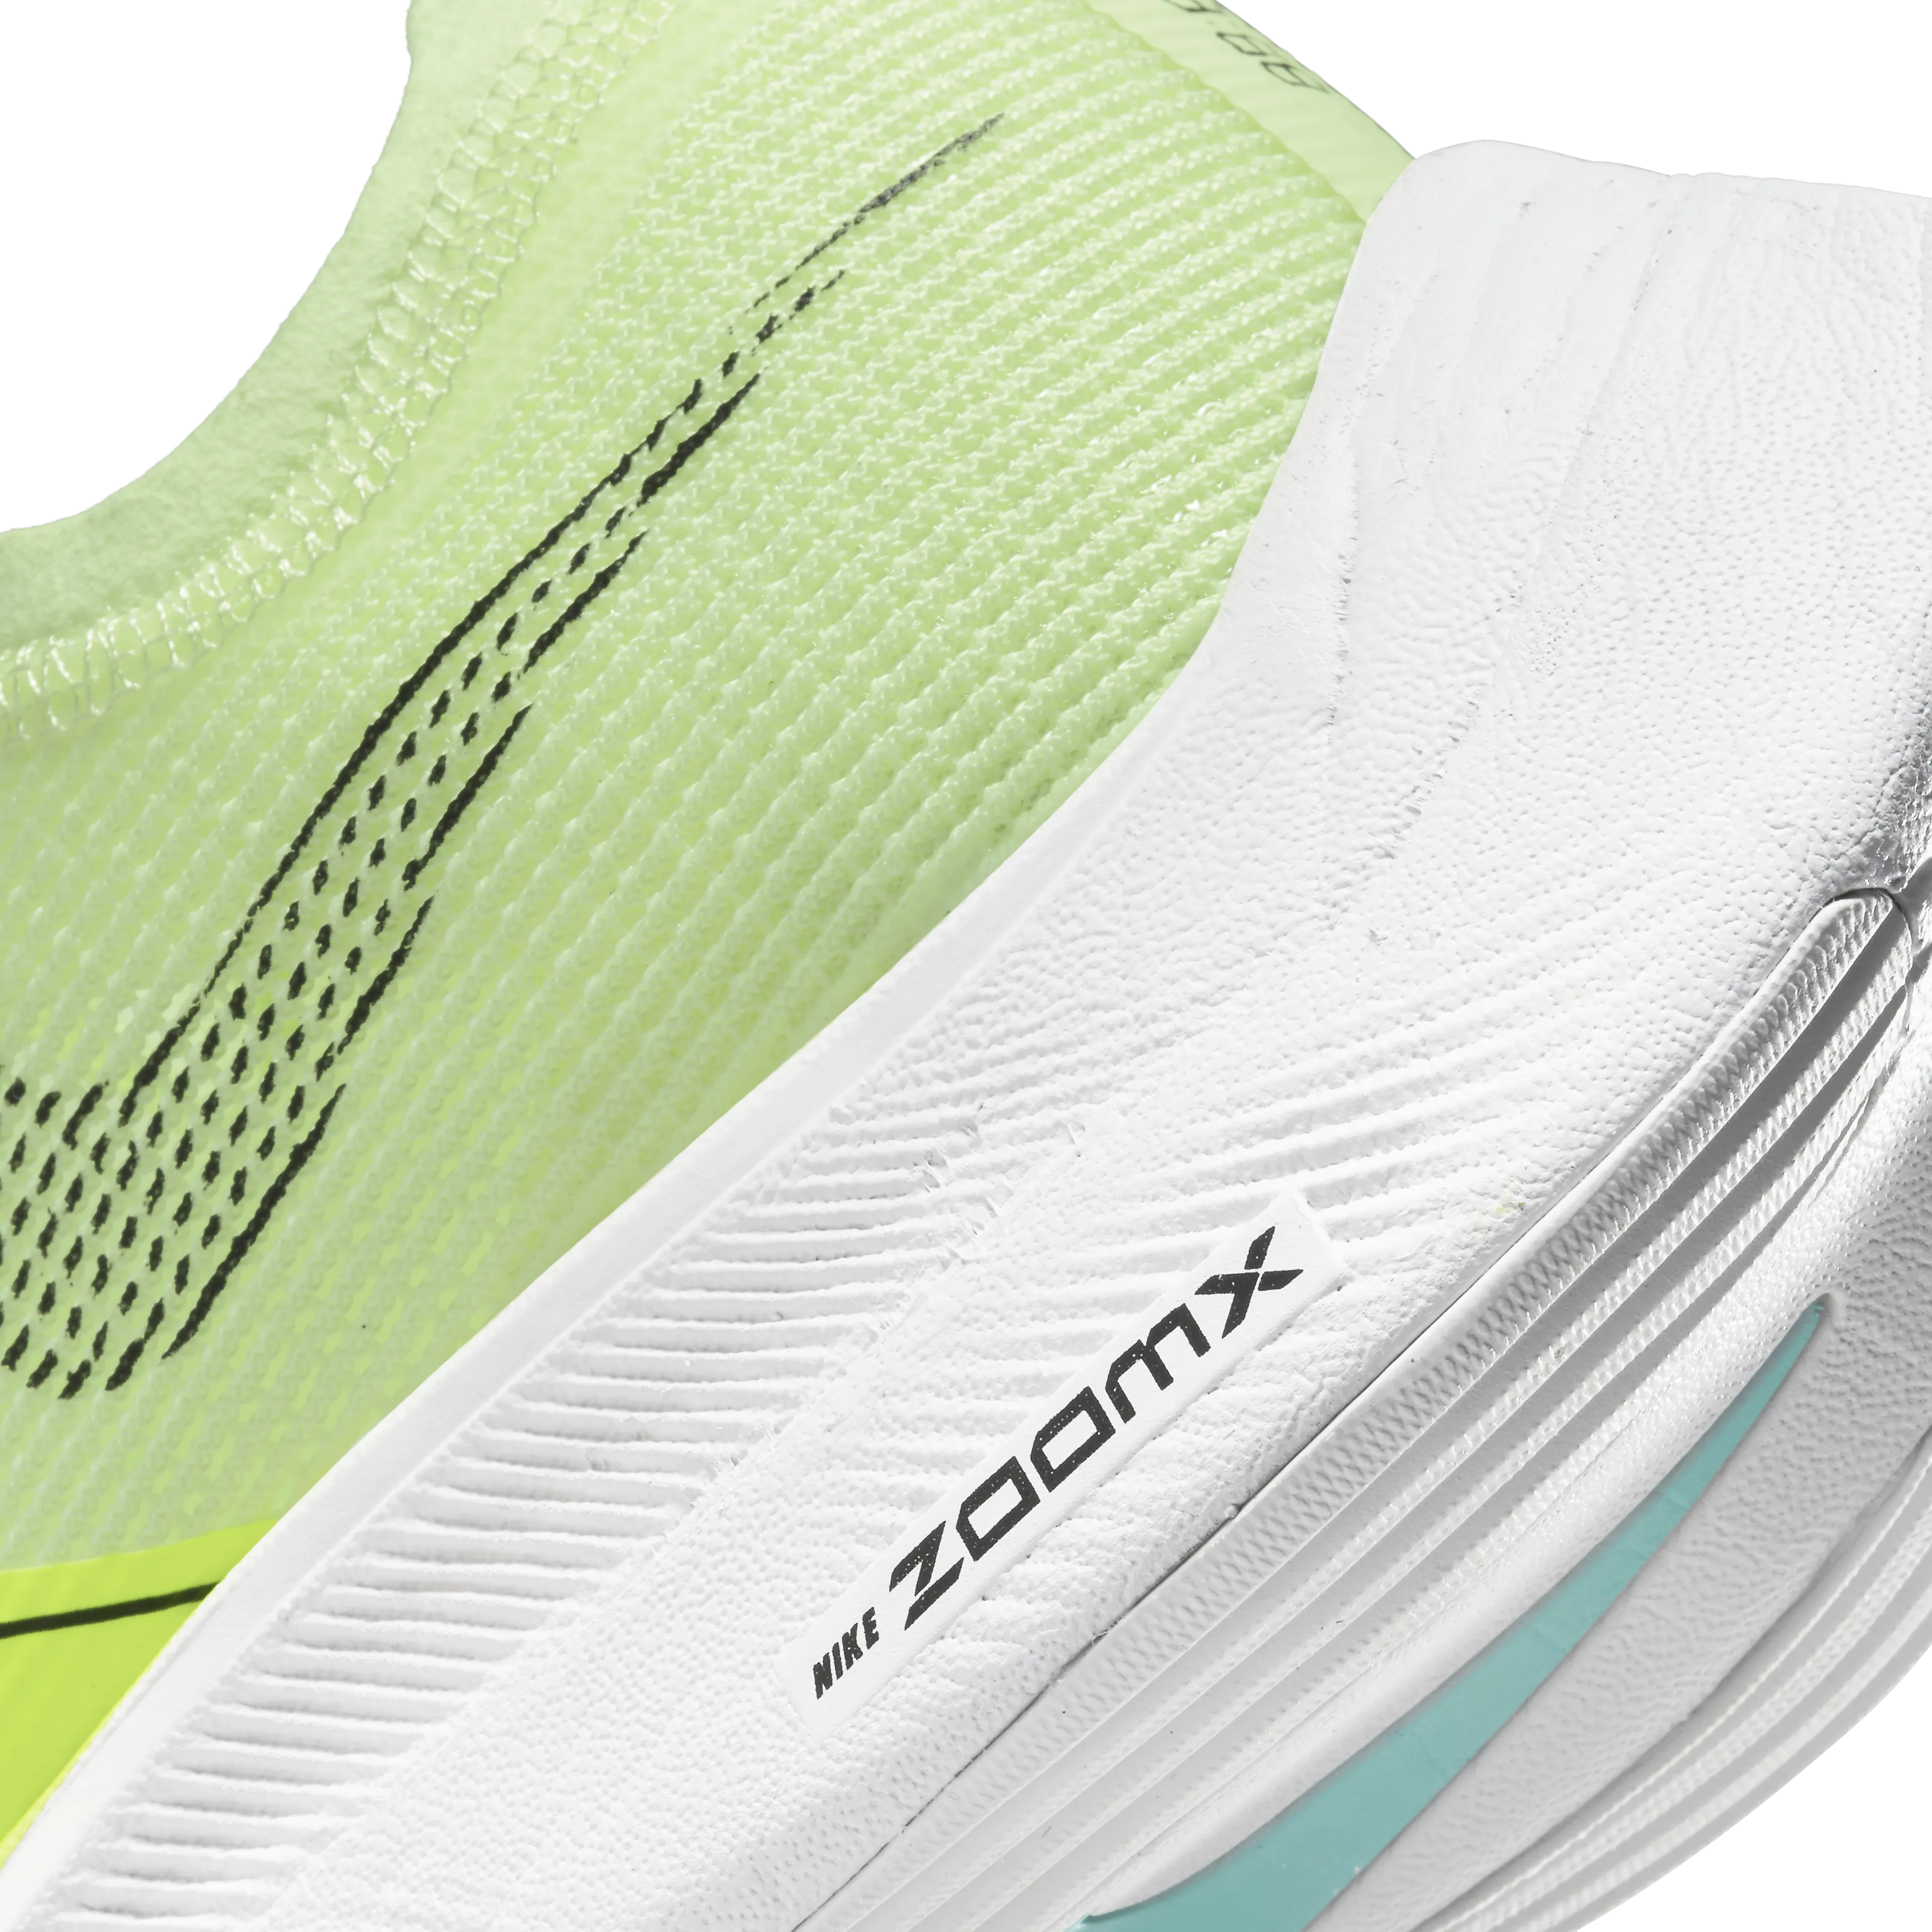 ZoomX Vaporfly Next% 2, dame